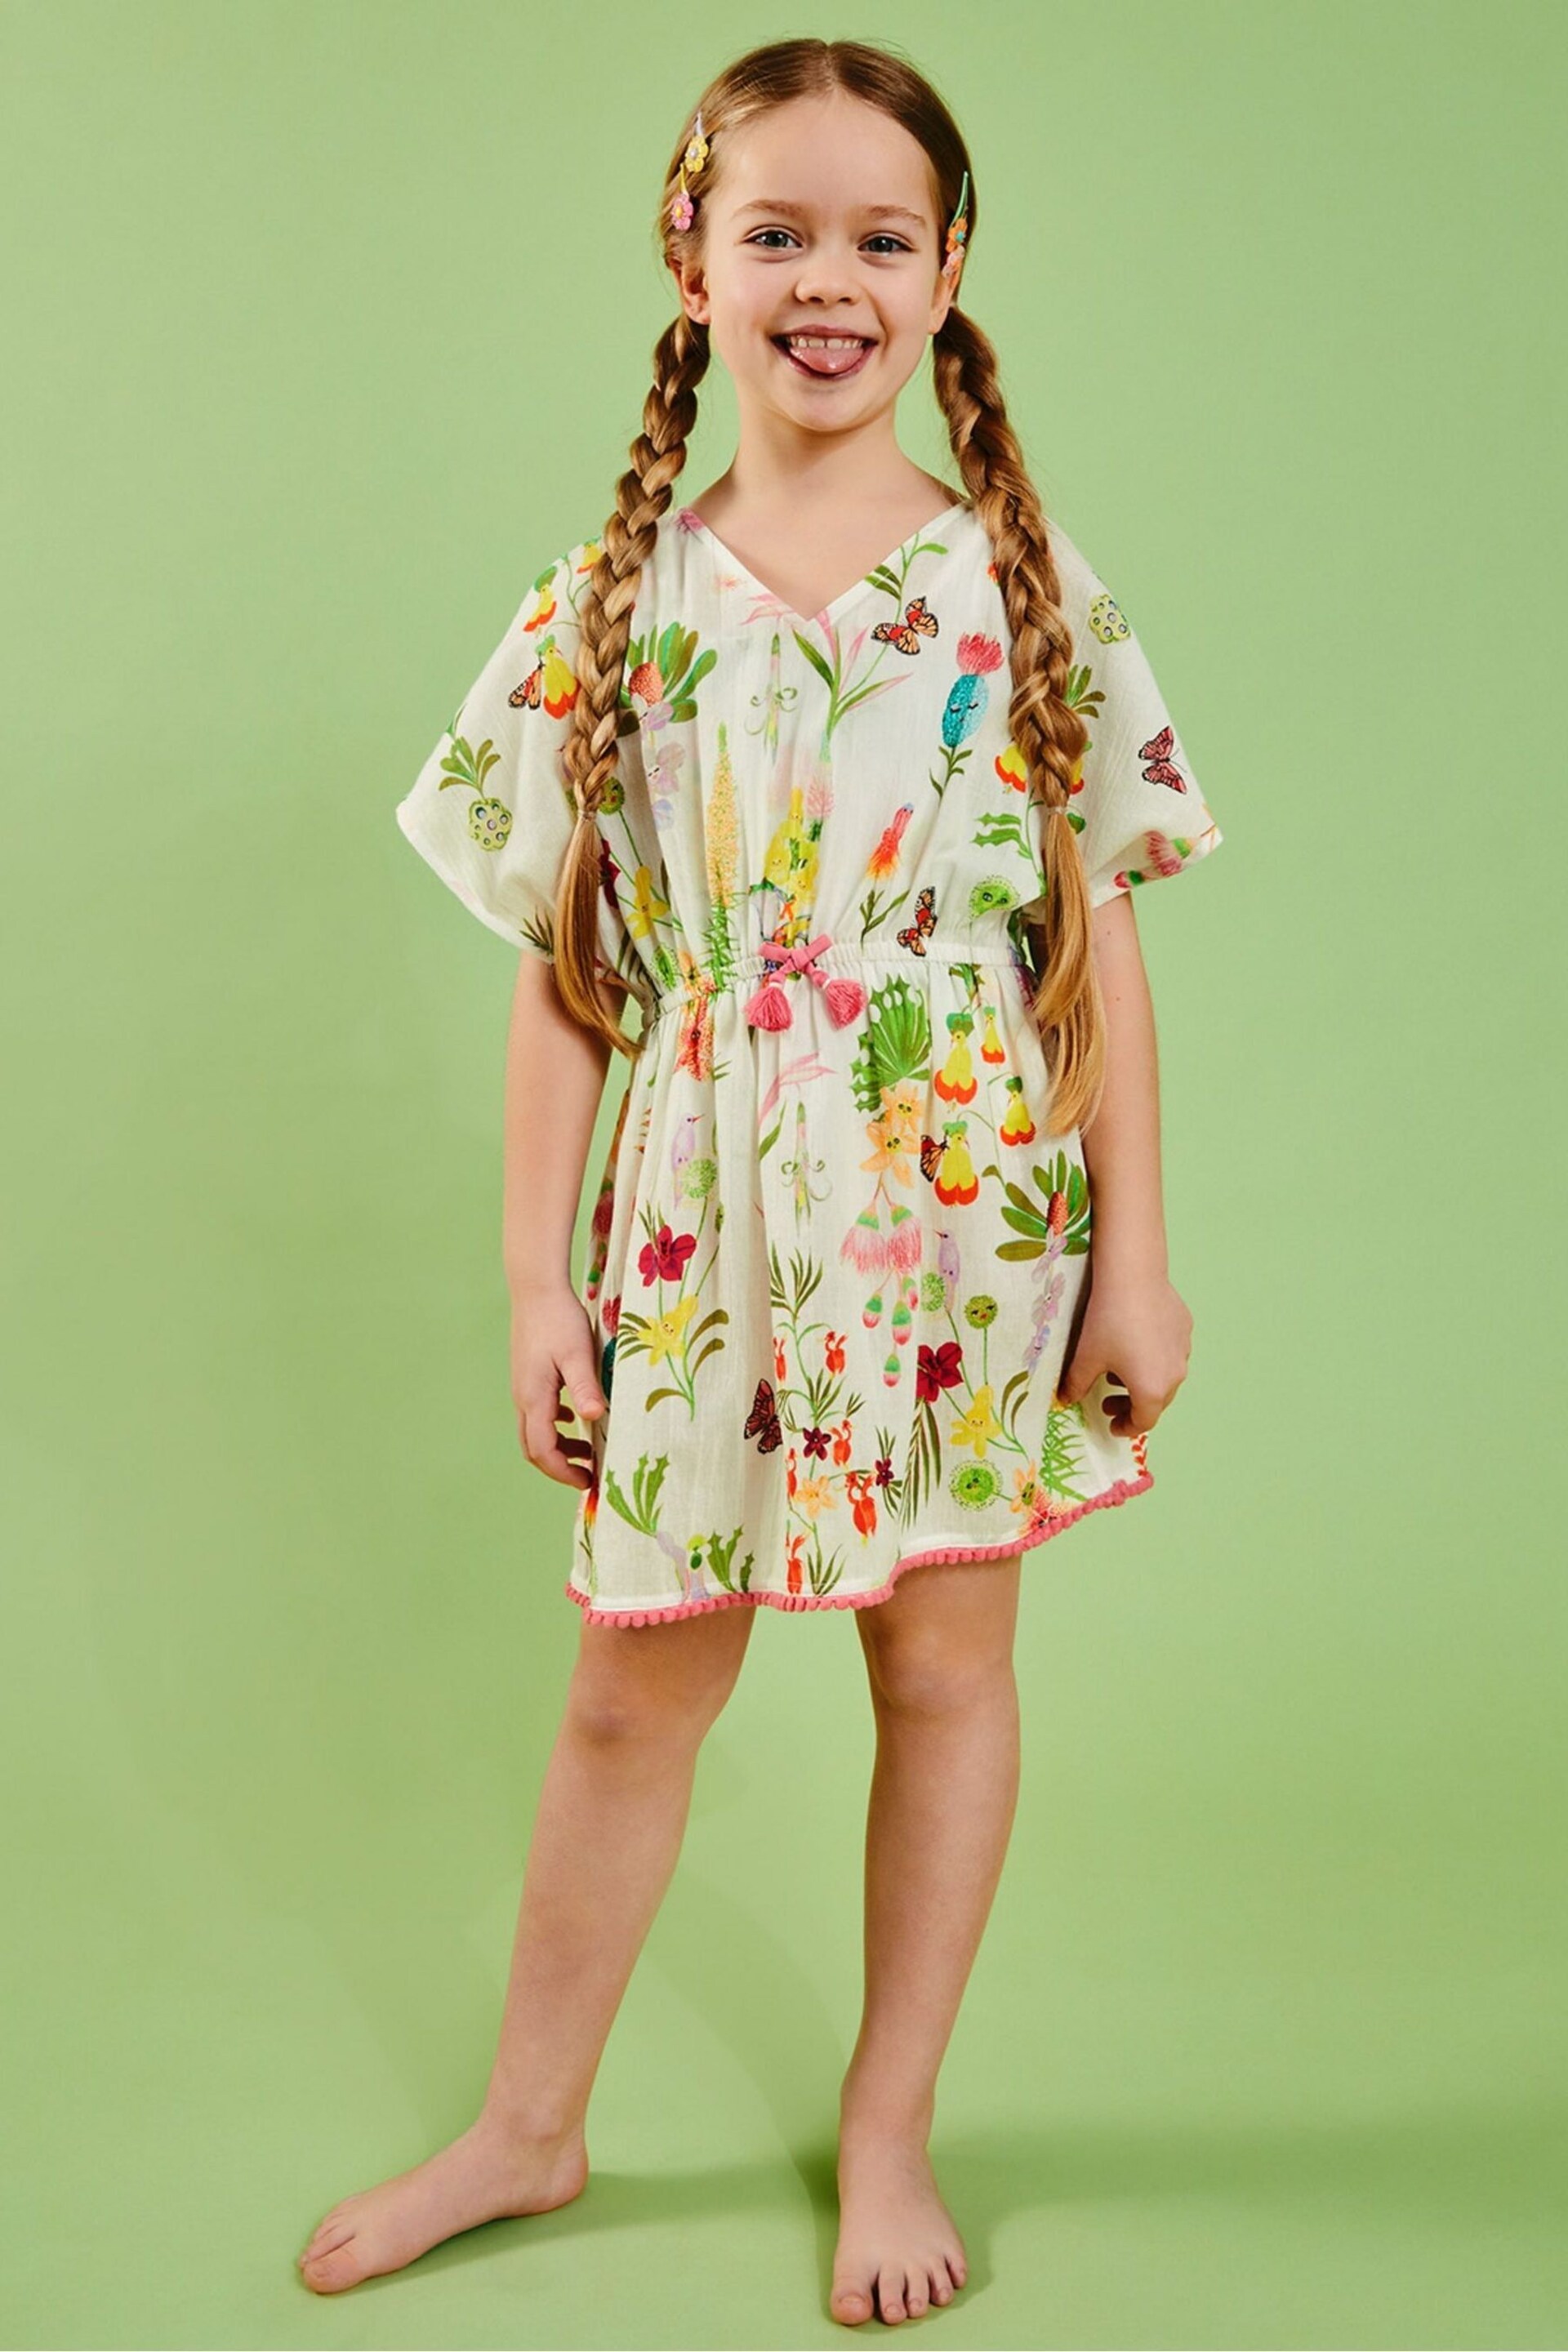 Angels By Accessorize Girls Floral Print White Kaftan - Image 1 of 3